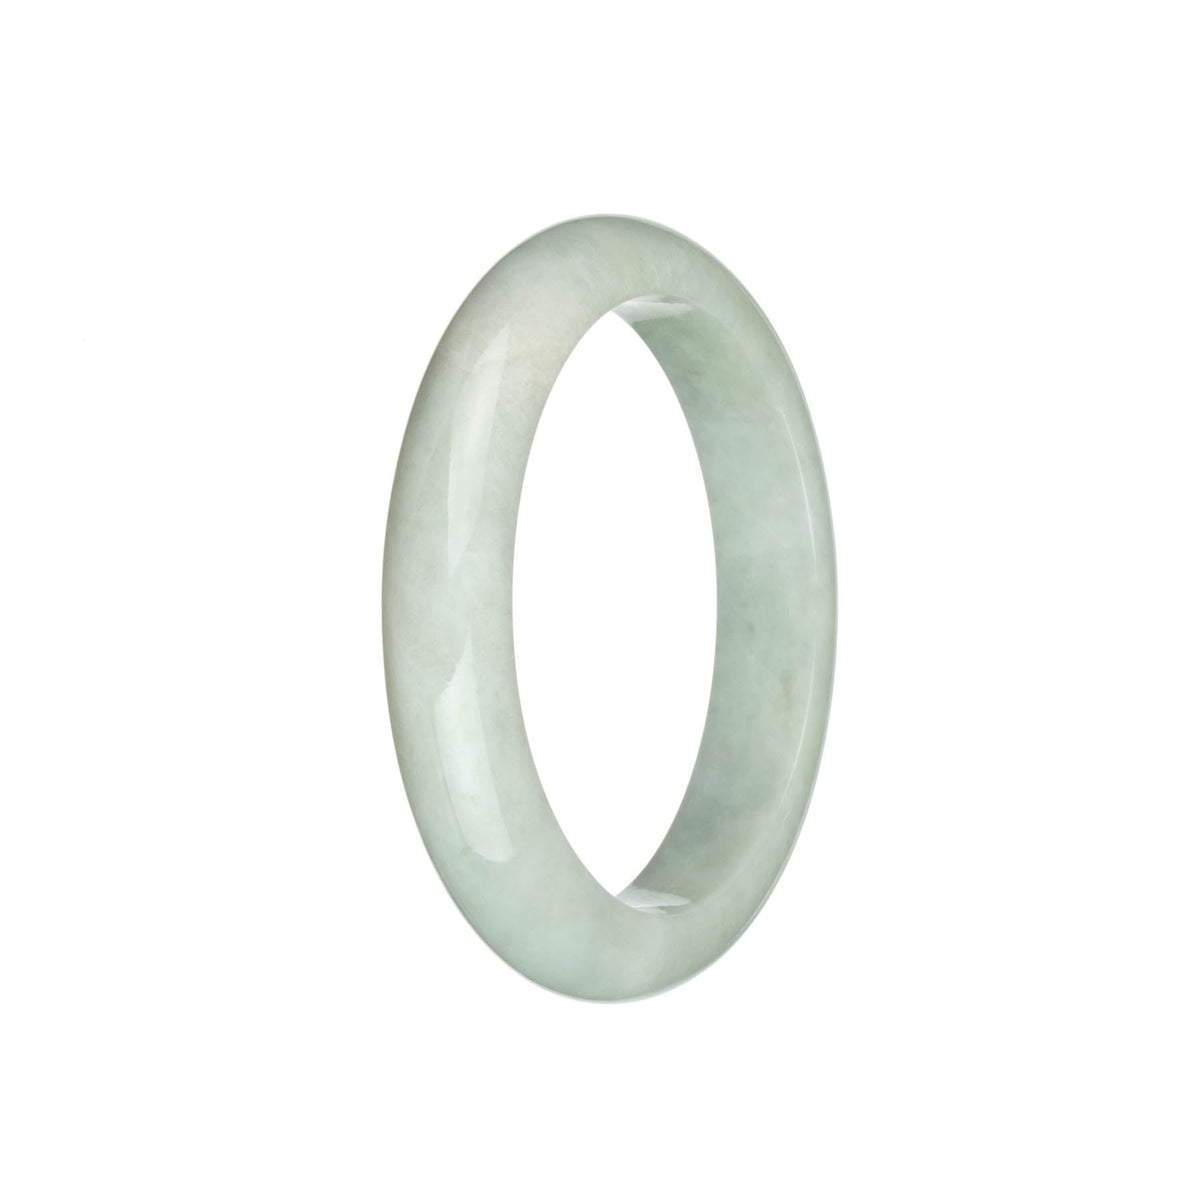 A pale green jadeite bangle bracelet with a white patch, featuring a genuine Type A jade. The bangle has a semi-round shape and measures 59mm. Made by MAYS.